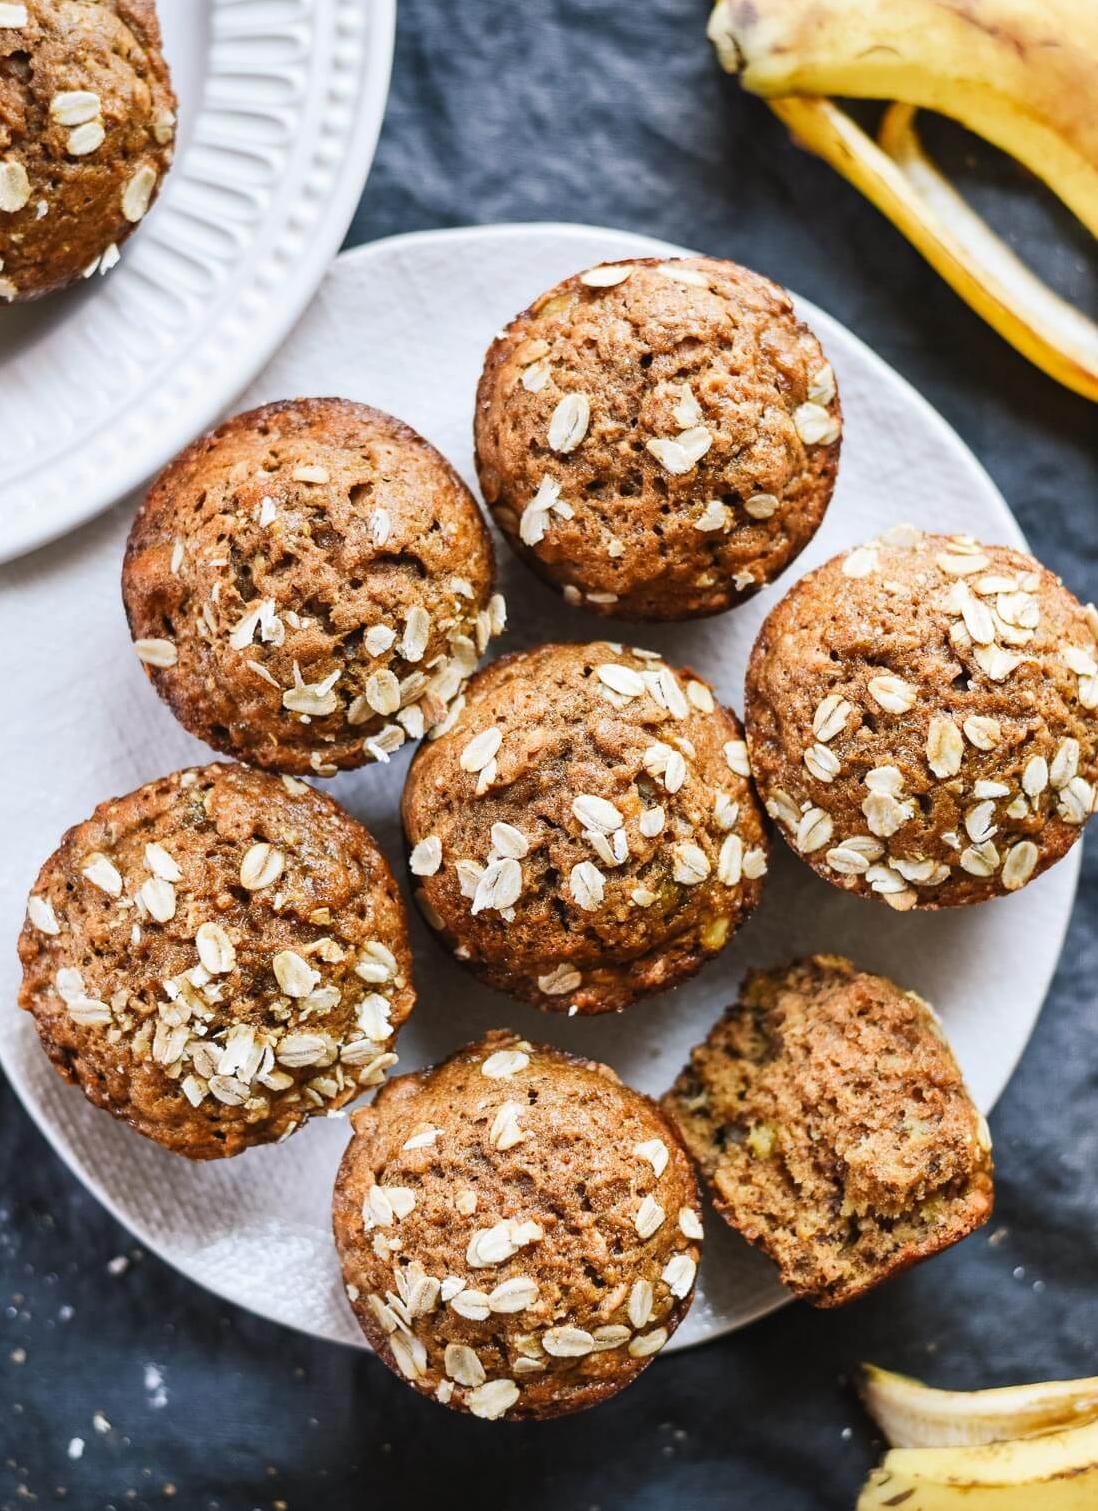  These muffins are the perfect grab-and-go breakfast!